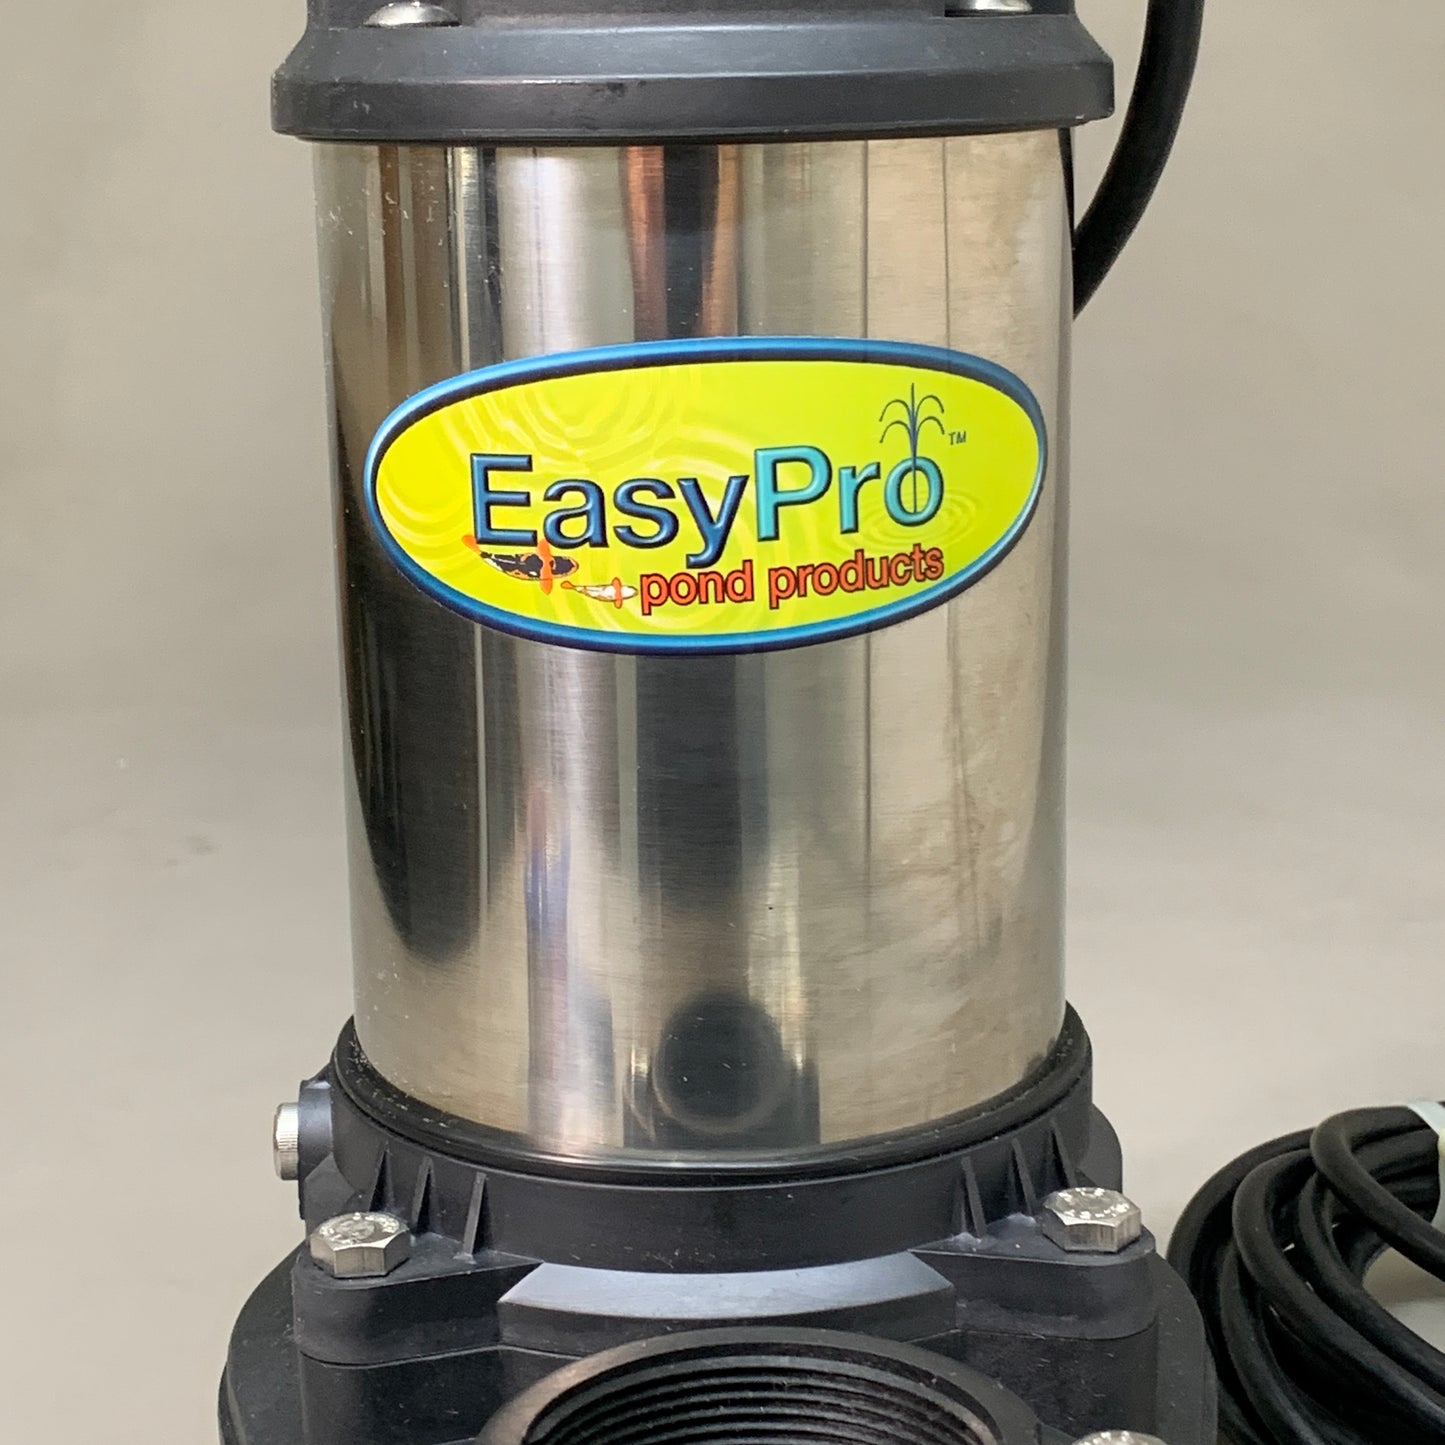 EASYPRO - 4100 GPH - 115 Volt - Stainless Steel Waterfall and Stream Pump - 20ft Power Cord (New)